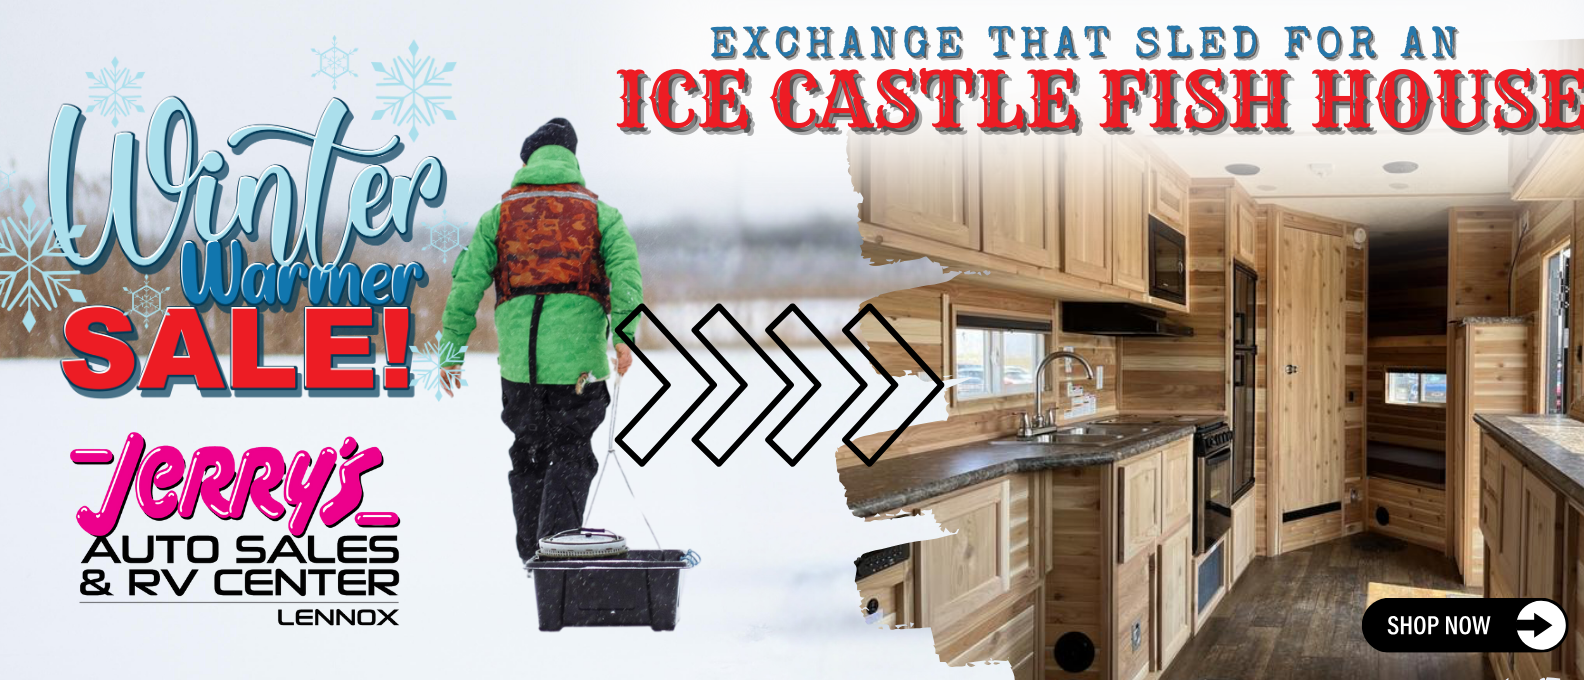 Exchange a sled today for a beautiful Ice Castle Fish House at Jerry's Camper & RV Center in Lennox